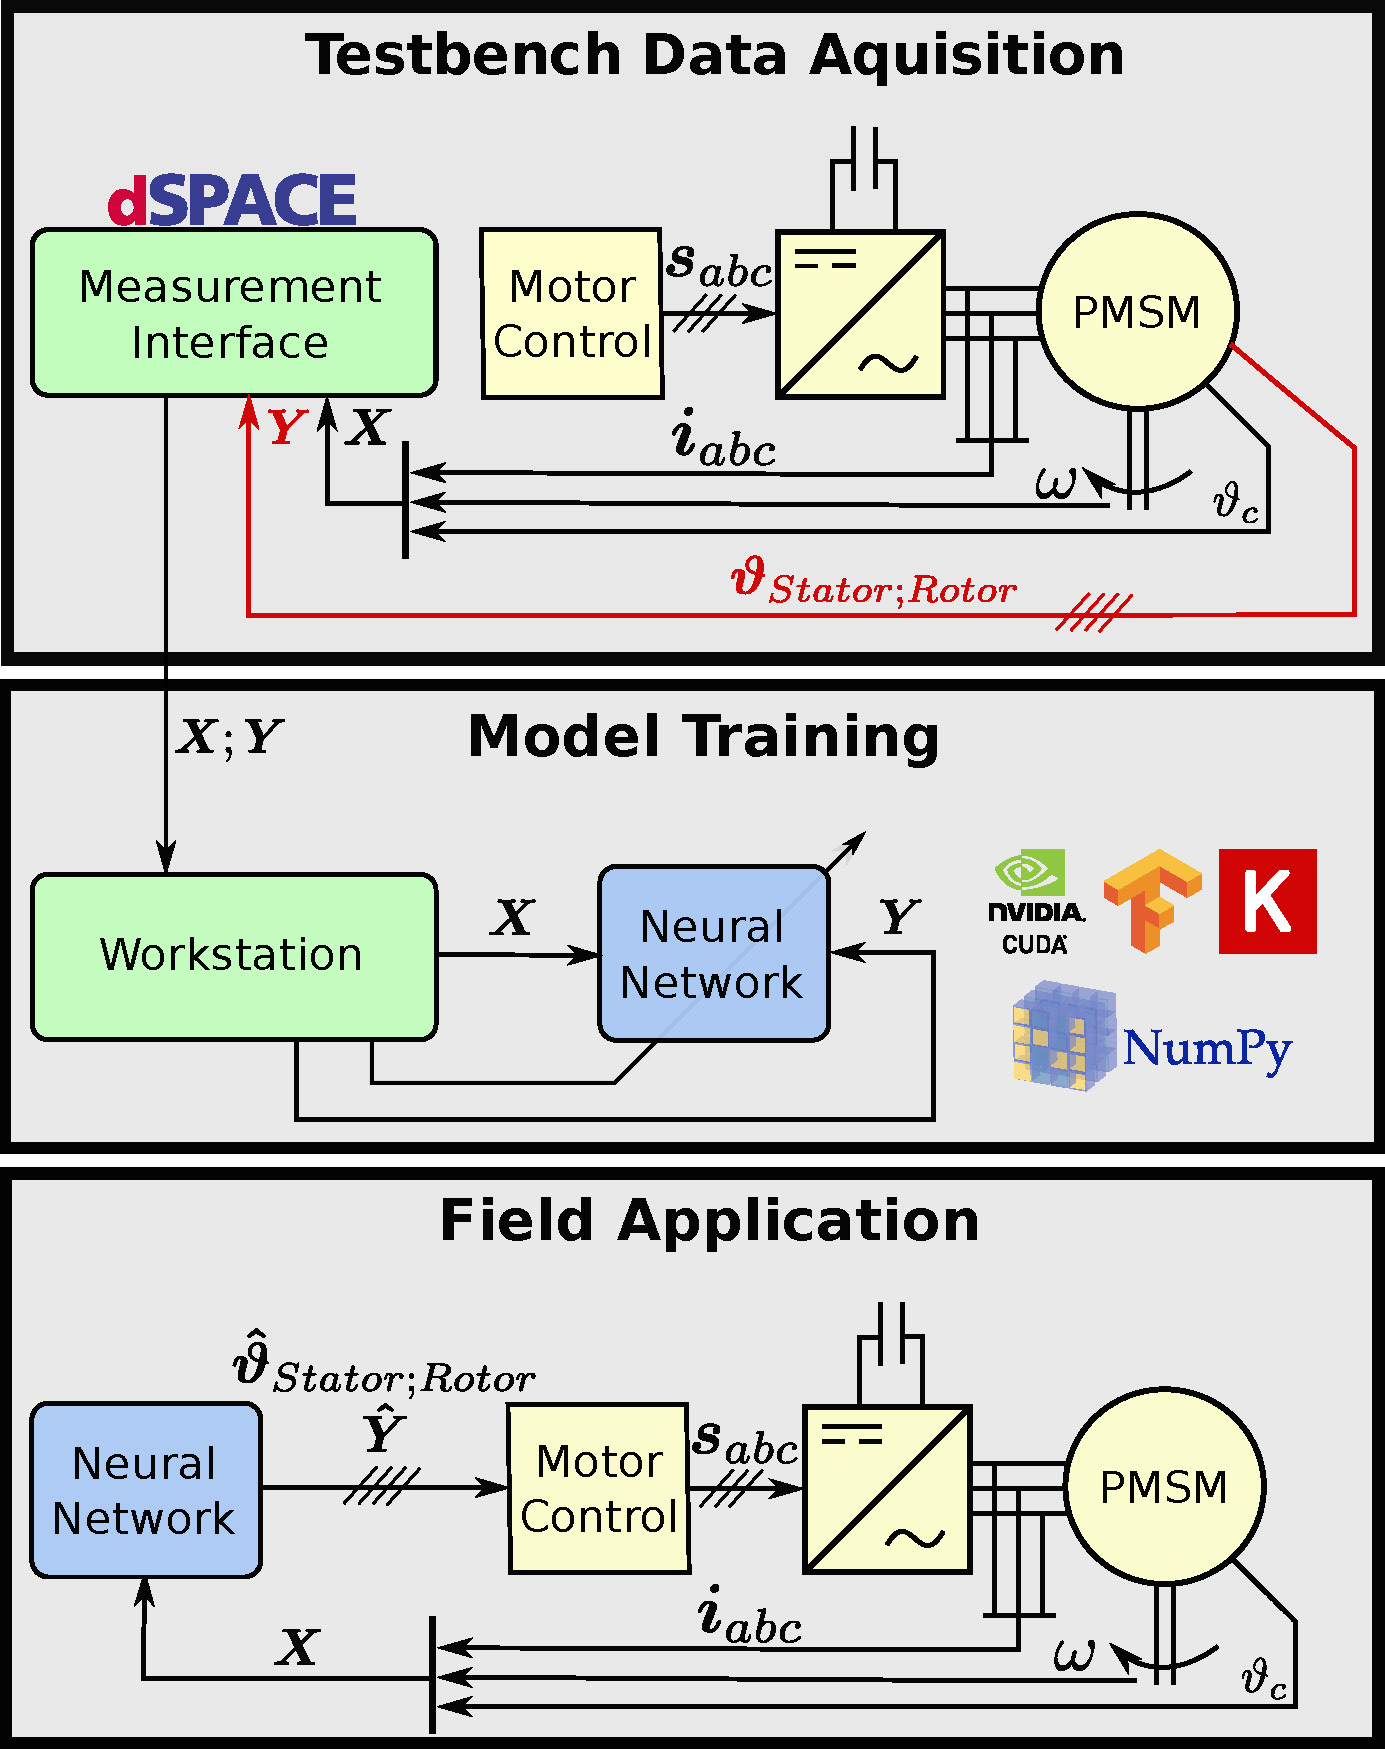 [Translate to English:] Simplified scheme of the entire process from data acquisition at the test bench over model training up to the applied temperature monitoring in the field.